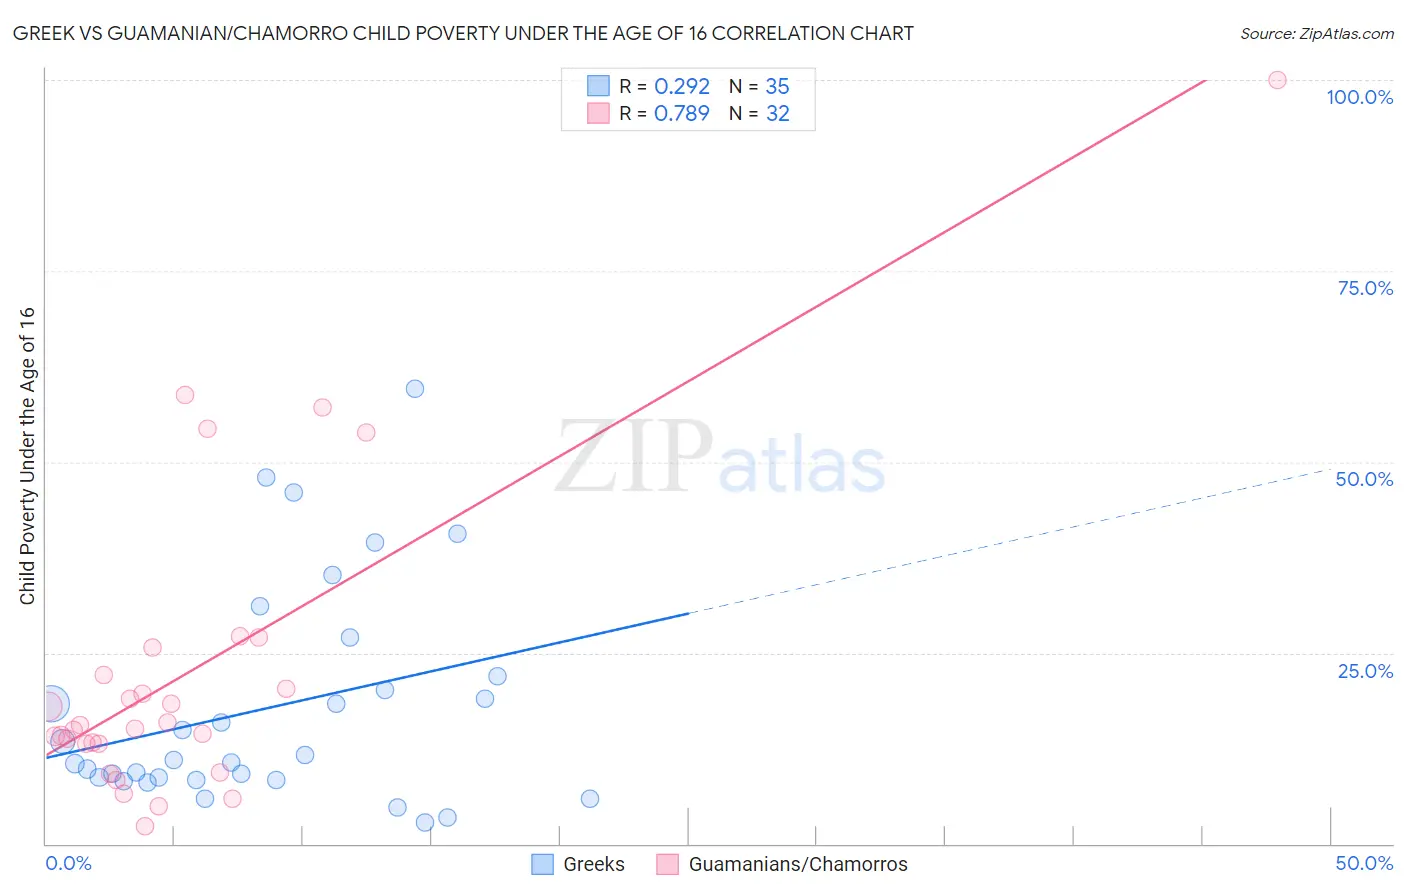 Greek vs Guamanian/Chamorro Child Poverty Under the Age of 16